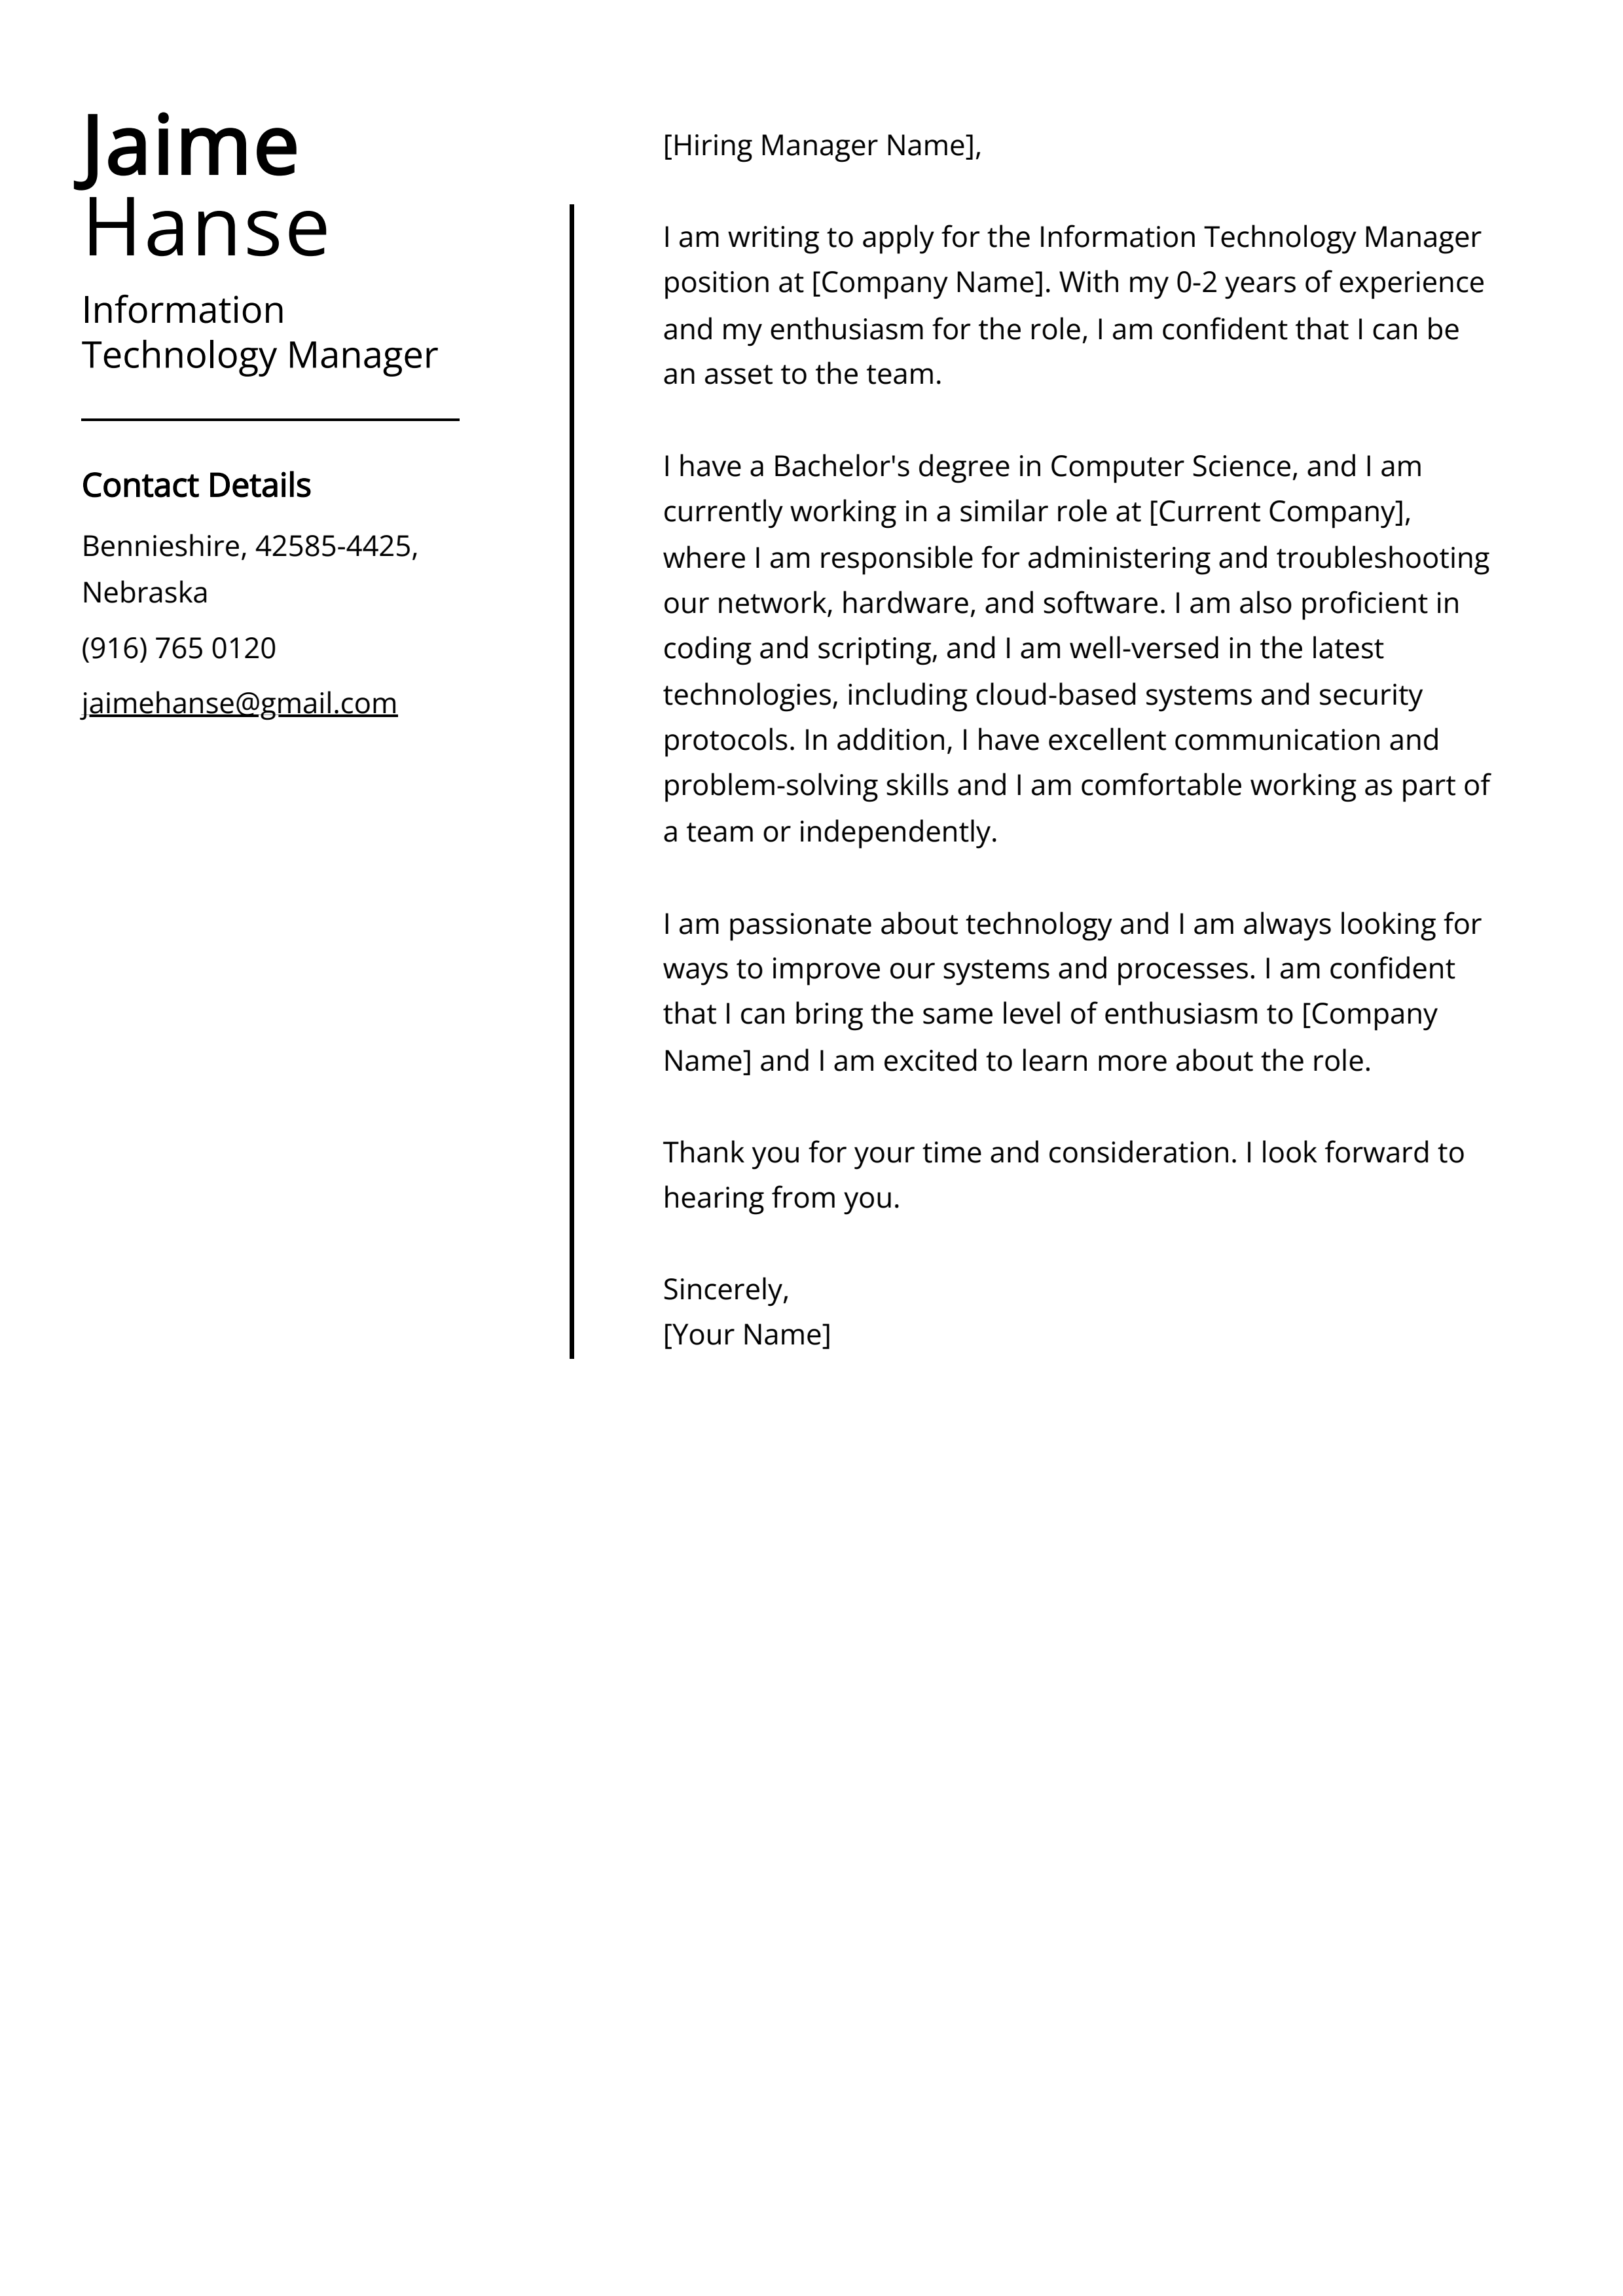 Information Technology Manager Cover Letter Example